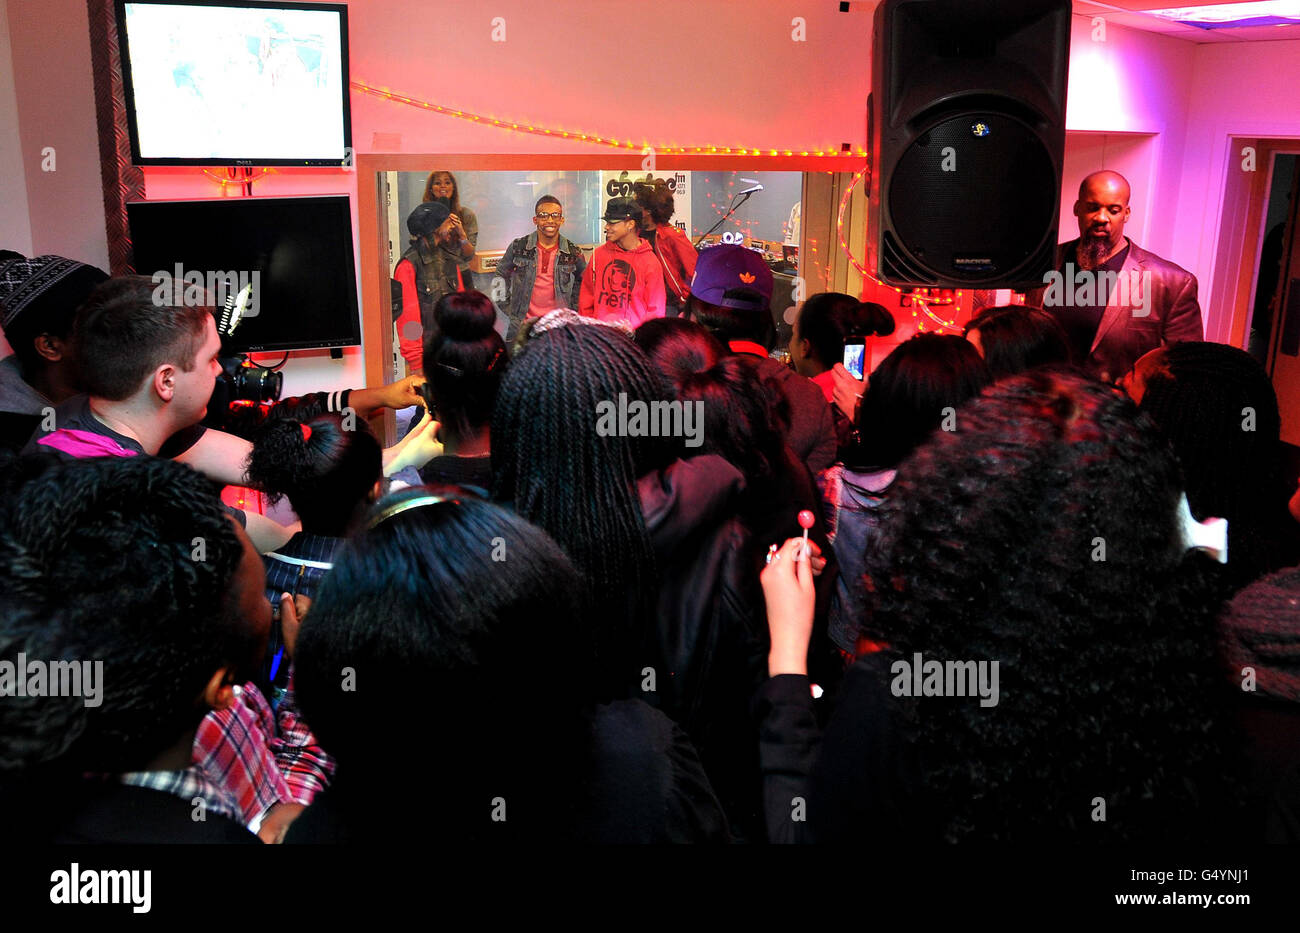 Fans of the new American pop band Mindless Behavior, watch during a live performance in the ChoiceFM studio Leicester Square in central London. Stock Photo